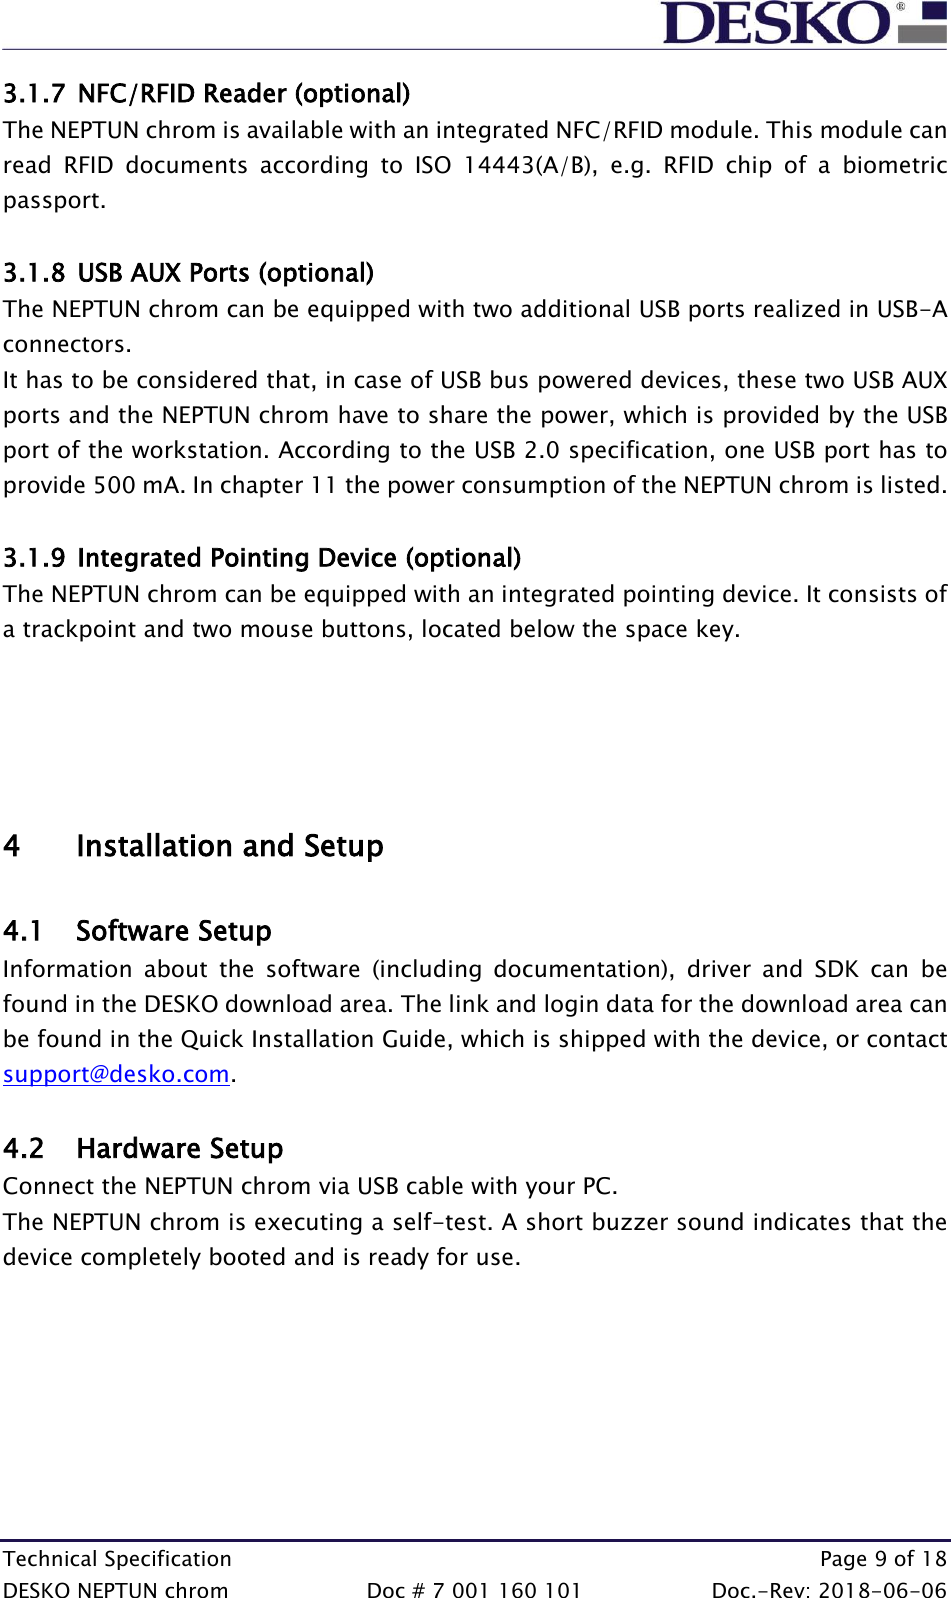  Technical Specification    Page 9 of 18 DESKO NEPTUN chrom  Doc # 7 001 160 101  Doc.-Rev: 2018-06-06 3.1.7 NFC/RFID Reader (optional) The NEPTUN chrom is available with an integrated NFC/RFID module. This module can read  RFID  documents  according  to  ISO  14443(A/B),  e.g.  RFID  chip  of  a  biometric passport.  3.1.8 USB AUX Ports (optional) The NEPTUN chrom can be equipped with two additional USB ports realized in USB-A connectors.  It has to be considered that, in case of USB bus powered devices, these two USB AUX ports and the NEPTUN chrom have to share the power, which is provided by the USB port of the workstation. According to the USB 2.0 specification, one USB port has to provide 500 mA. In chapter 11 the power consumption of the NEPTUN chrom is listed.  3.1.9 Integrated Pointing Device (optional) The NEPTUN chrom can be equipped with an integrated pointing device. It consists of a trackpoint and two mouse buttons, located below the space key.      4 Installation and Setup  4.1 Software Setup Information  about  the  software  (including  documentation),  driver  and  SDK  can  be found in the DESKO download area. The link and login data for the download area can be found in the Quick Installation Guide, which is shipped with the device, or contact support@desko.com.   4.2 Hardware Setup Connect the NEPTUN chrom via USB cable with your PC.  The NEPTUN chrom is executing a self-test. A short buzzer sound indicates that the device completely booted and is ready for use.    